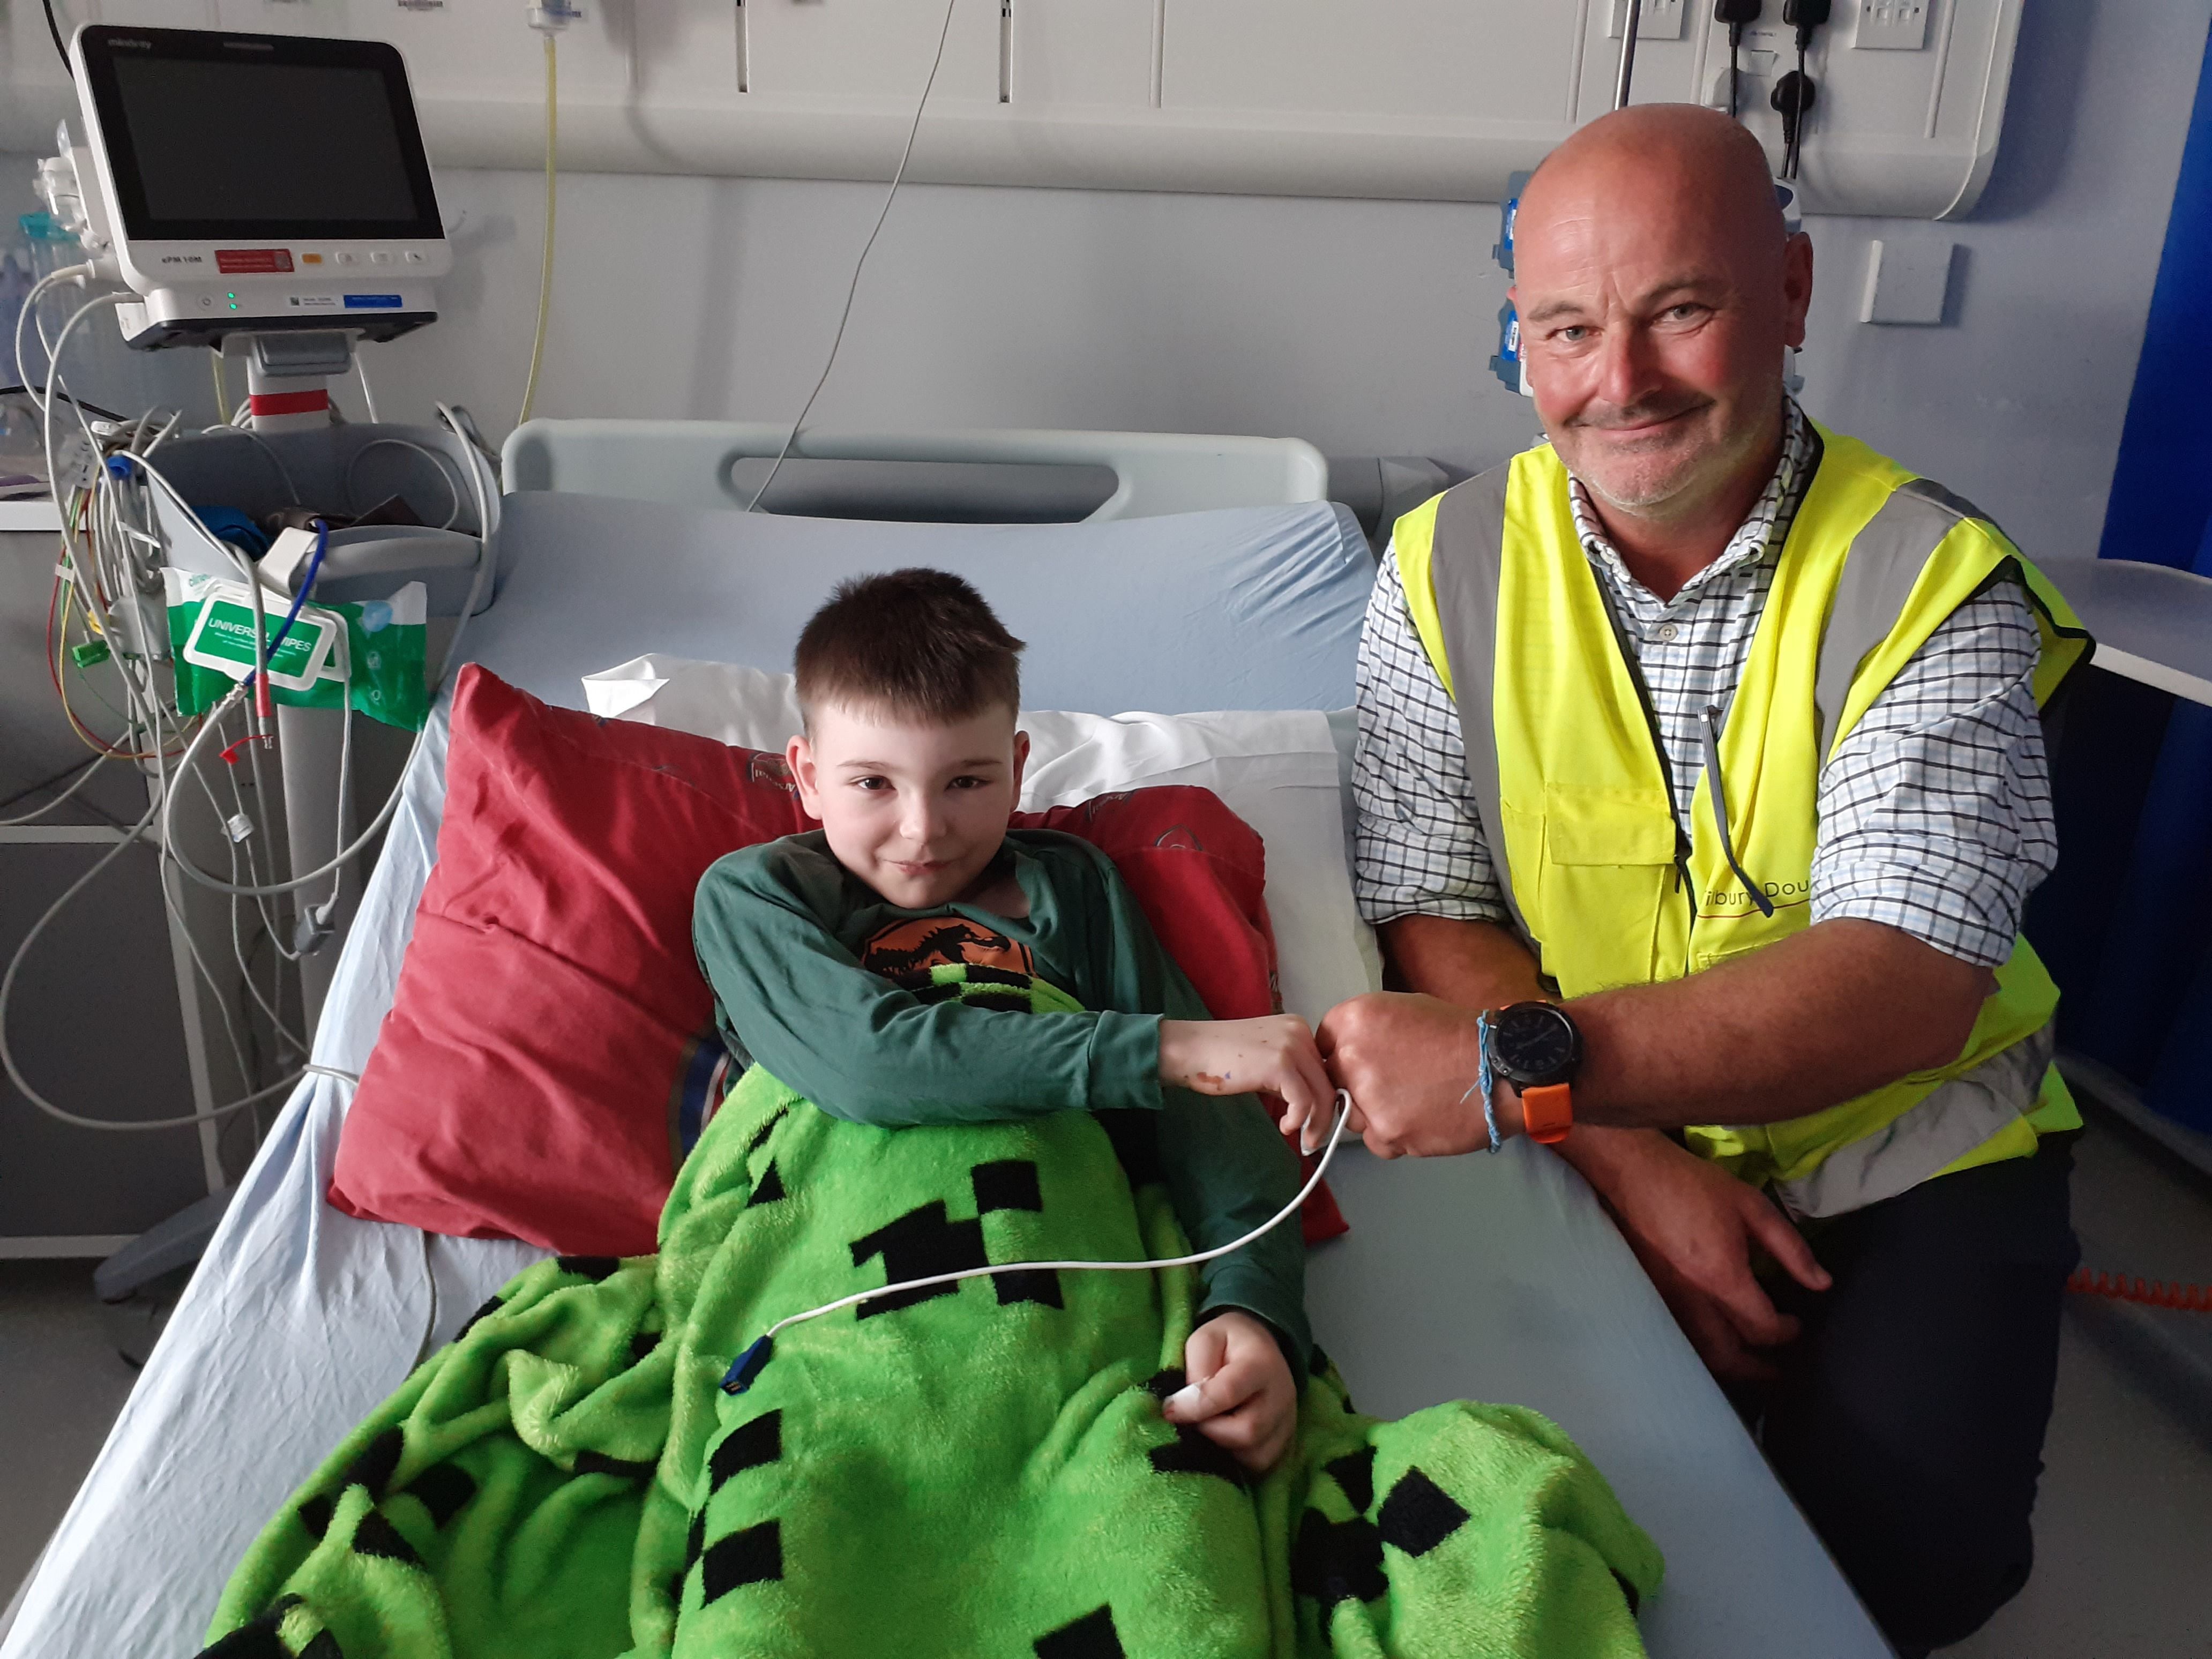 'Brooklyn very nearly died that day' Walsall parents thank hero construction worker who saved their young son's life 